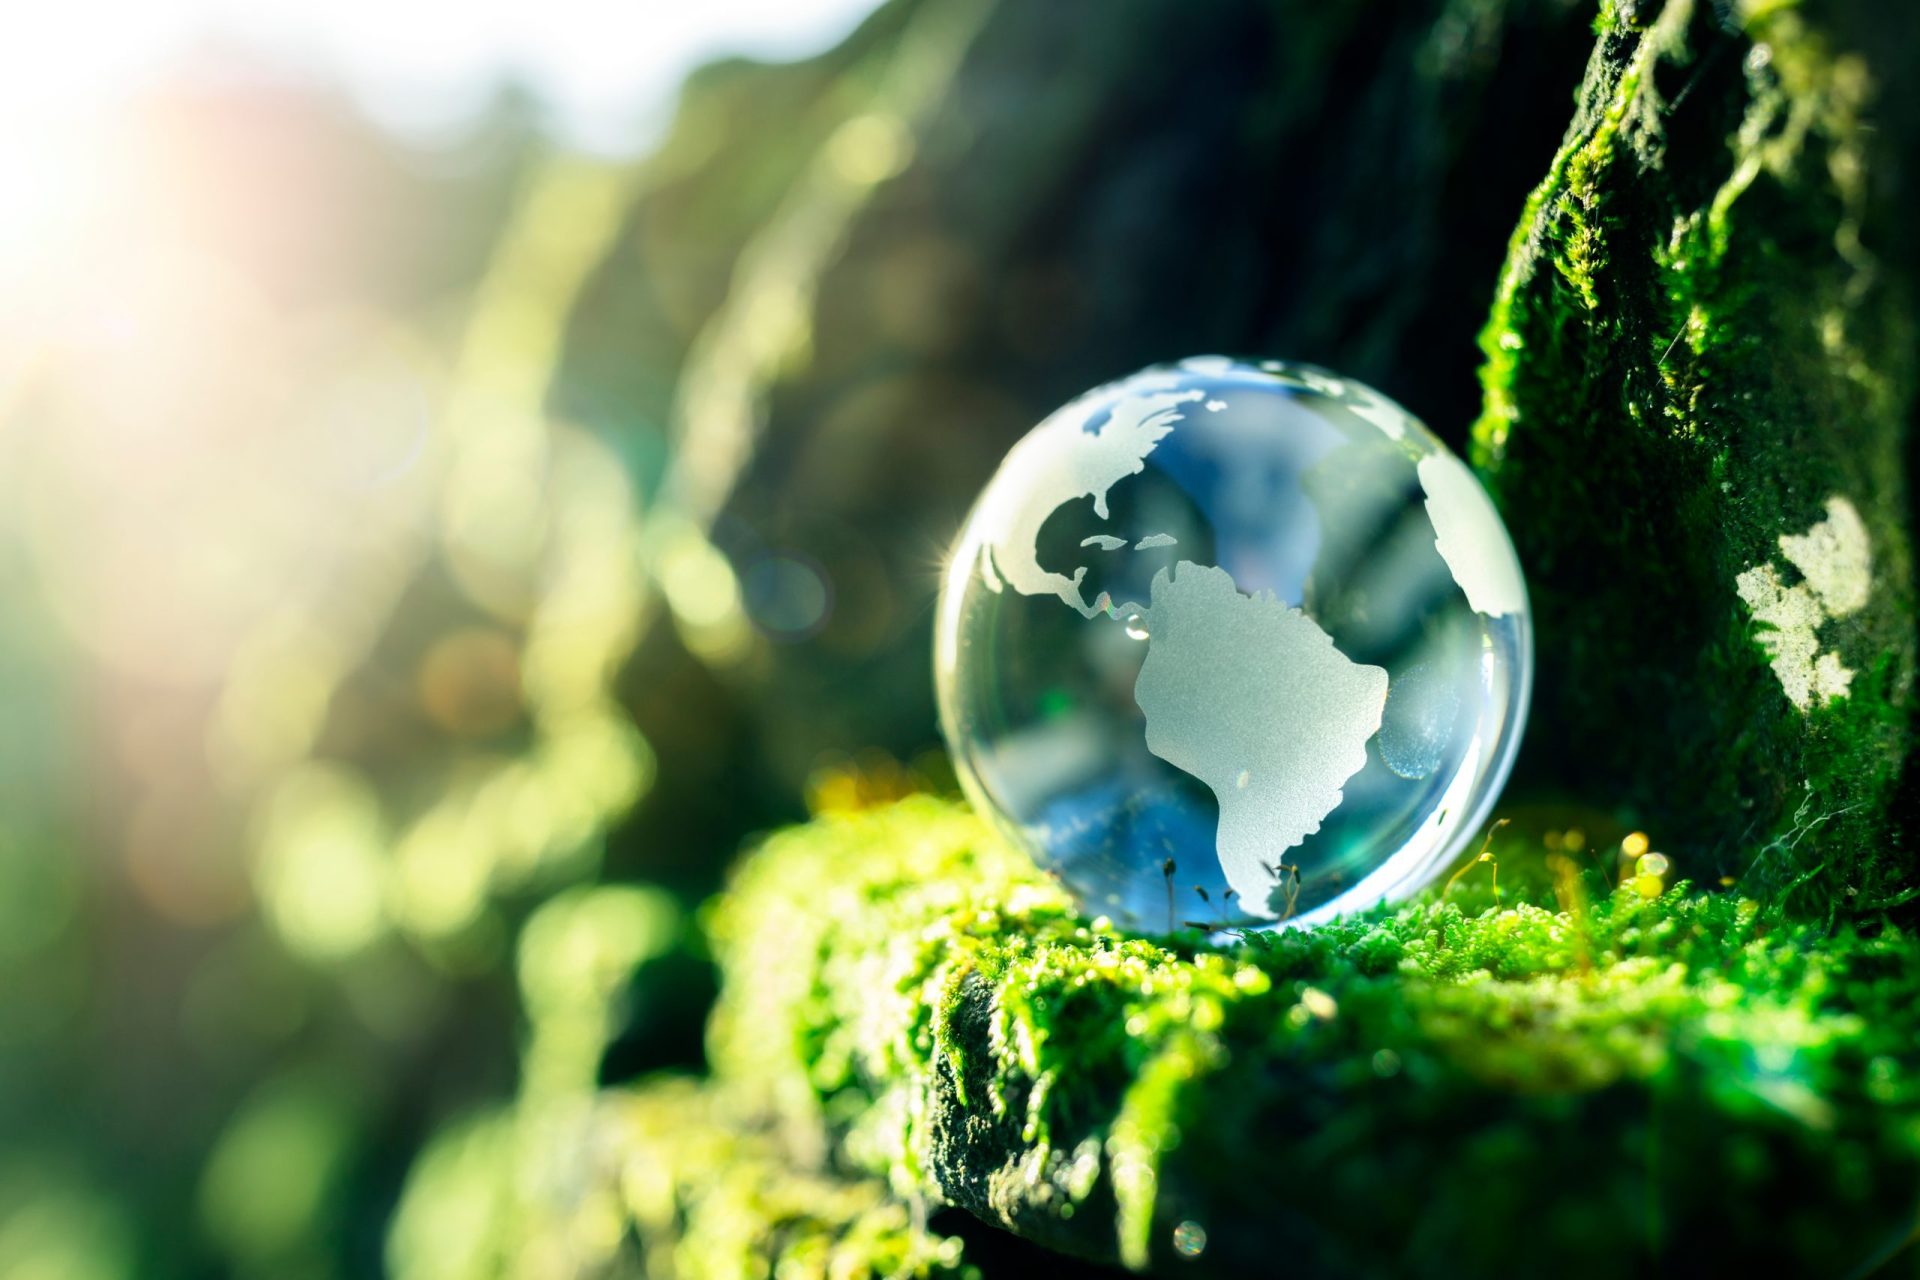 Glass globe on mossy rock with greenery in the background